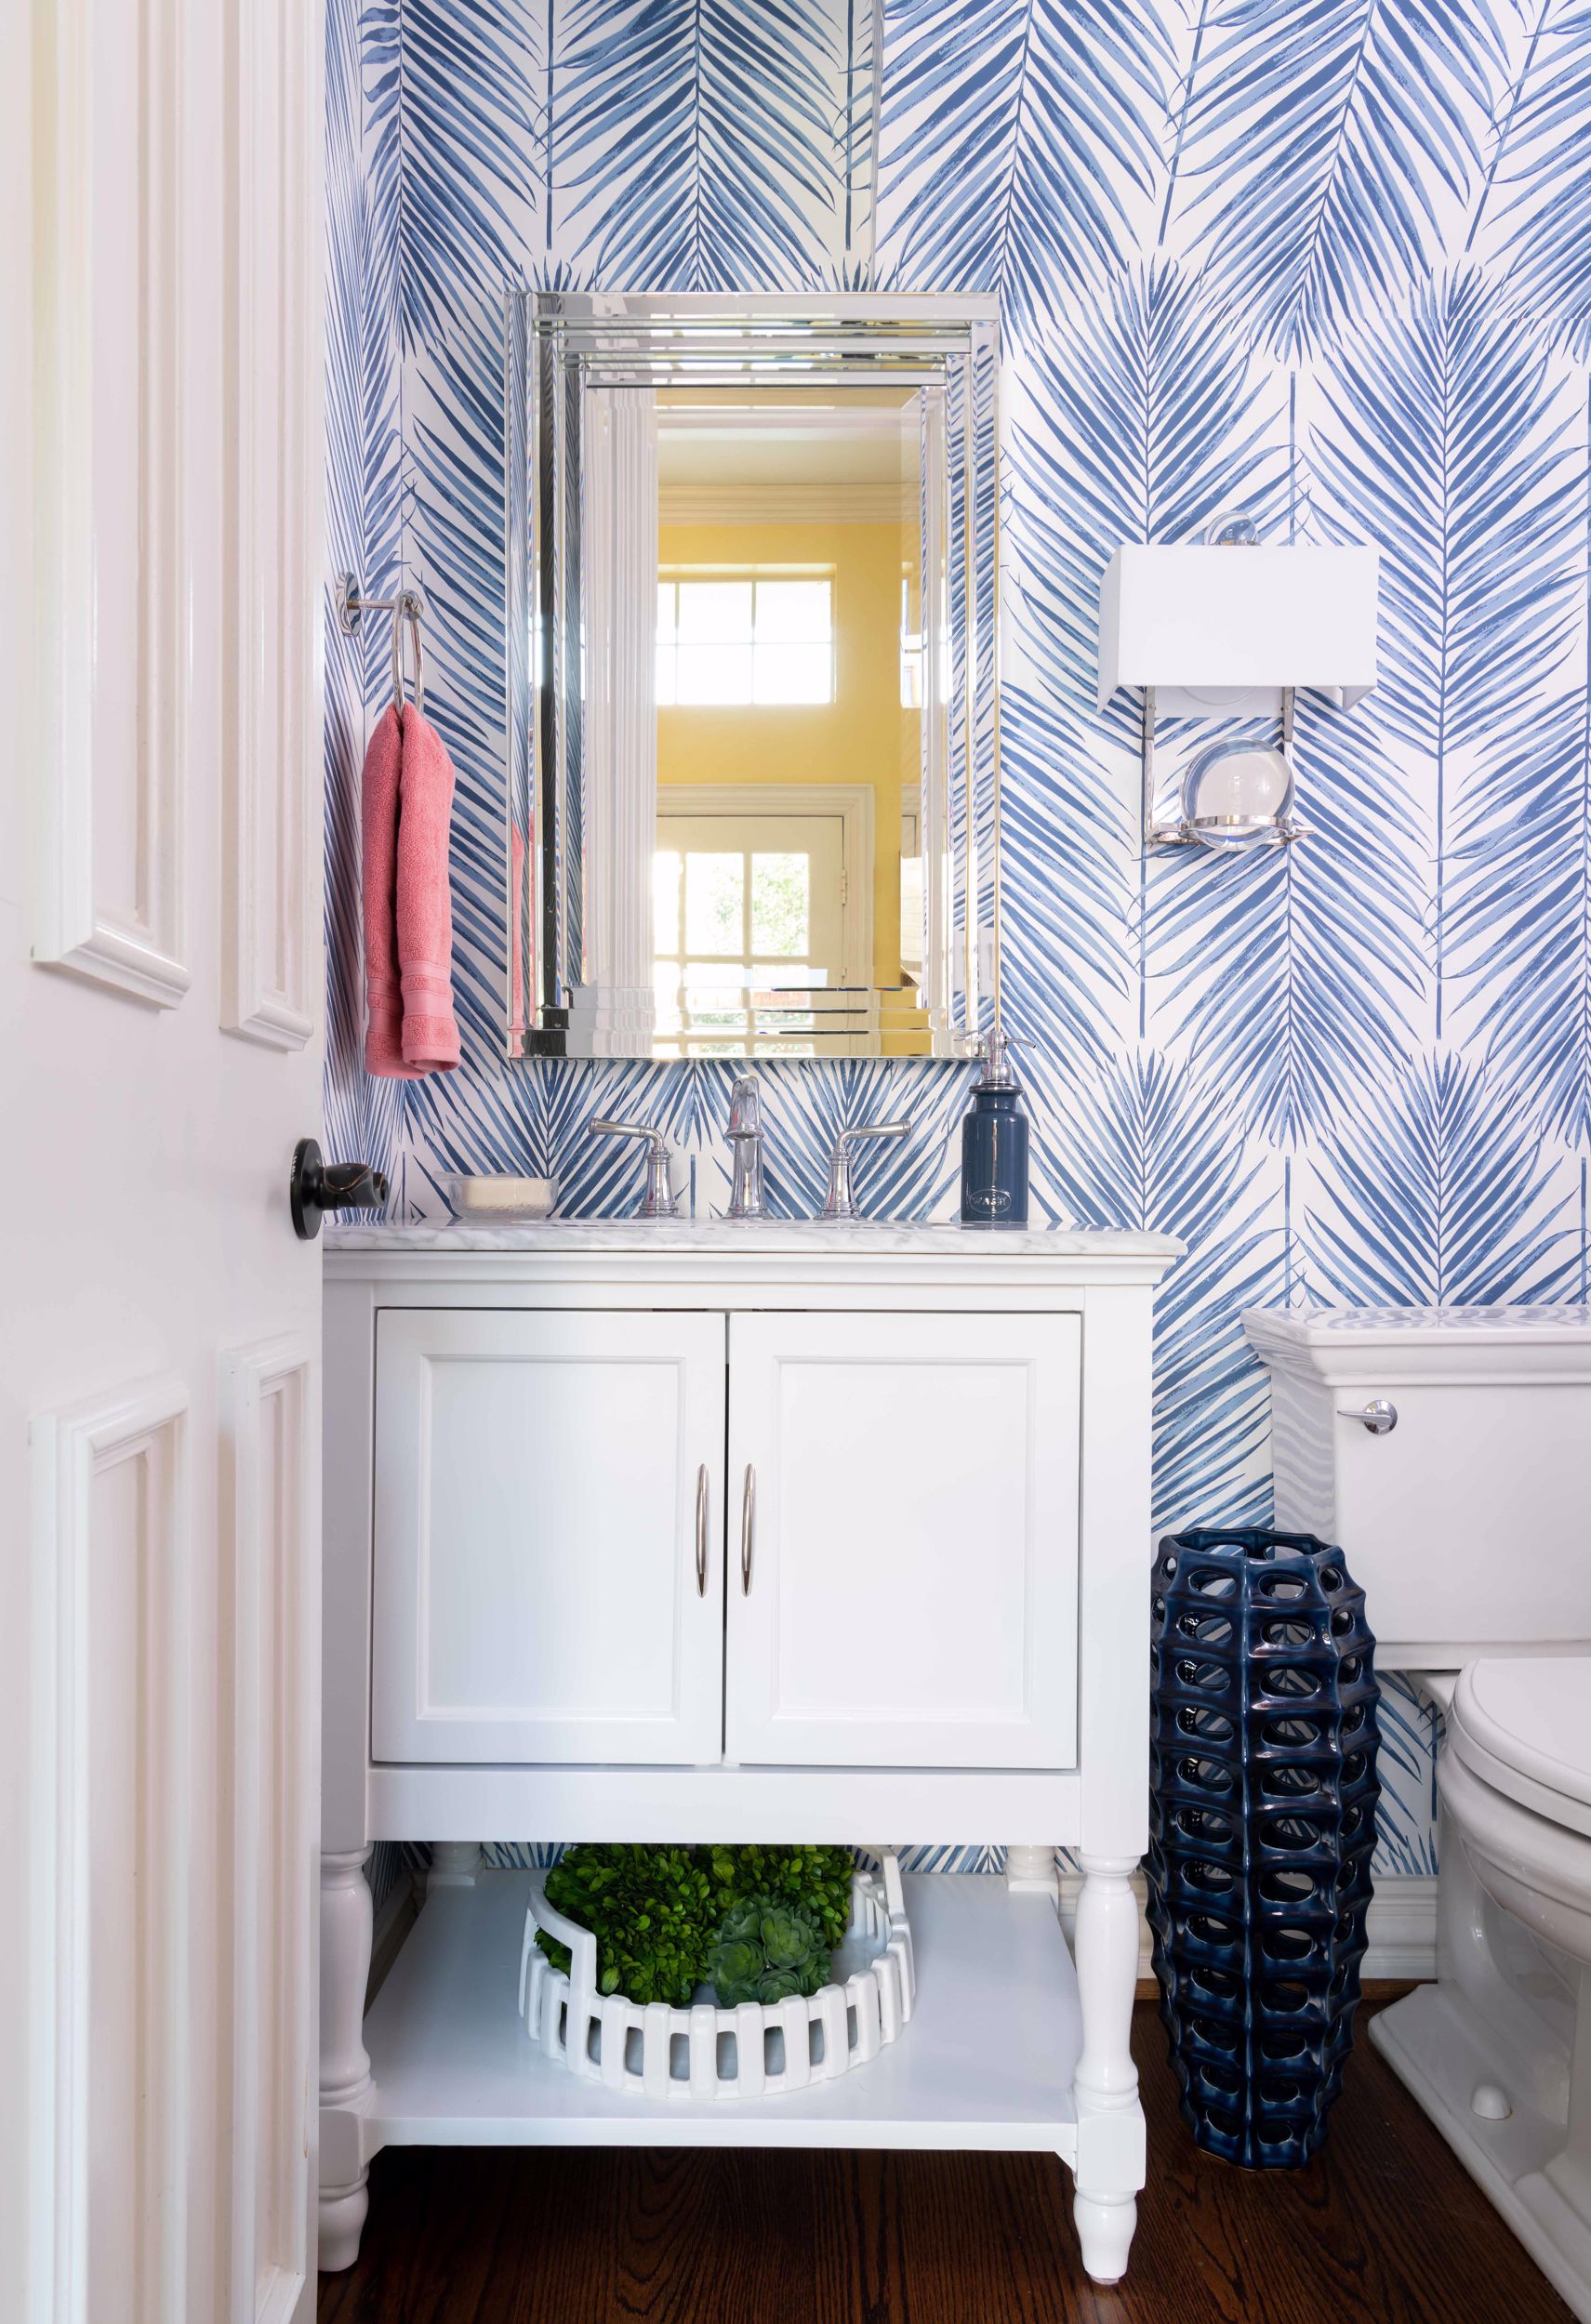 Bold wallpaper can make a major difference in the bathroom.